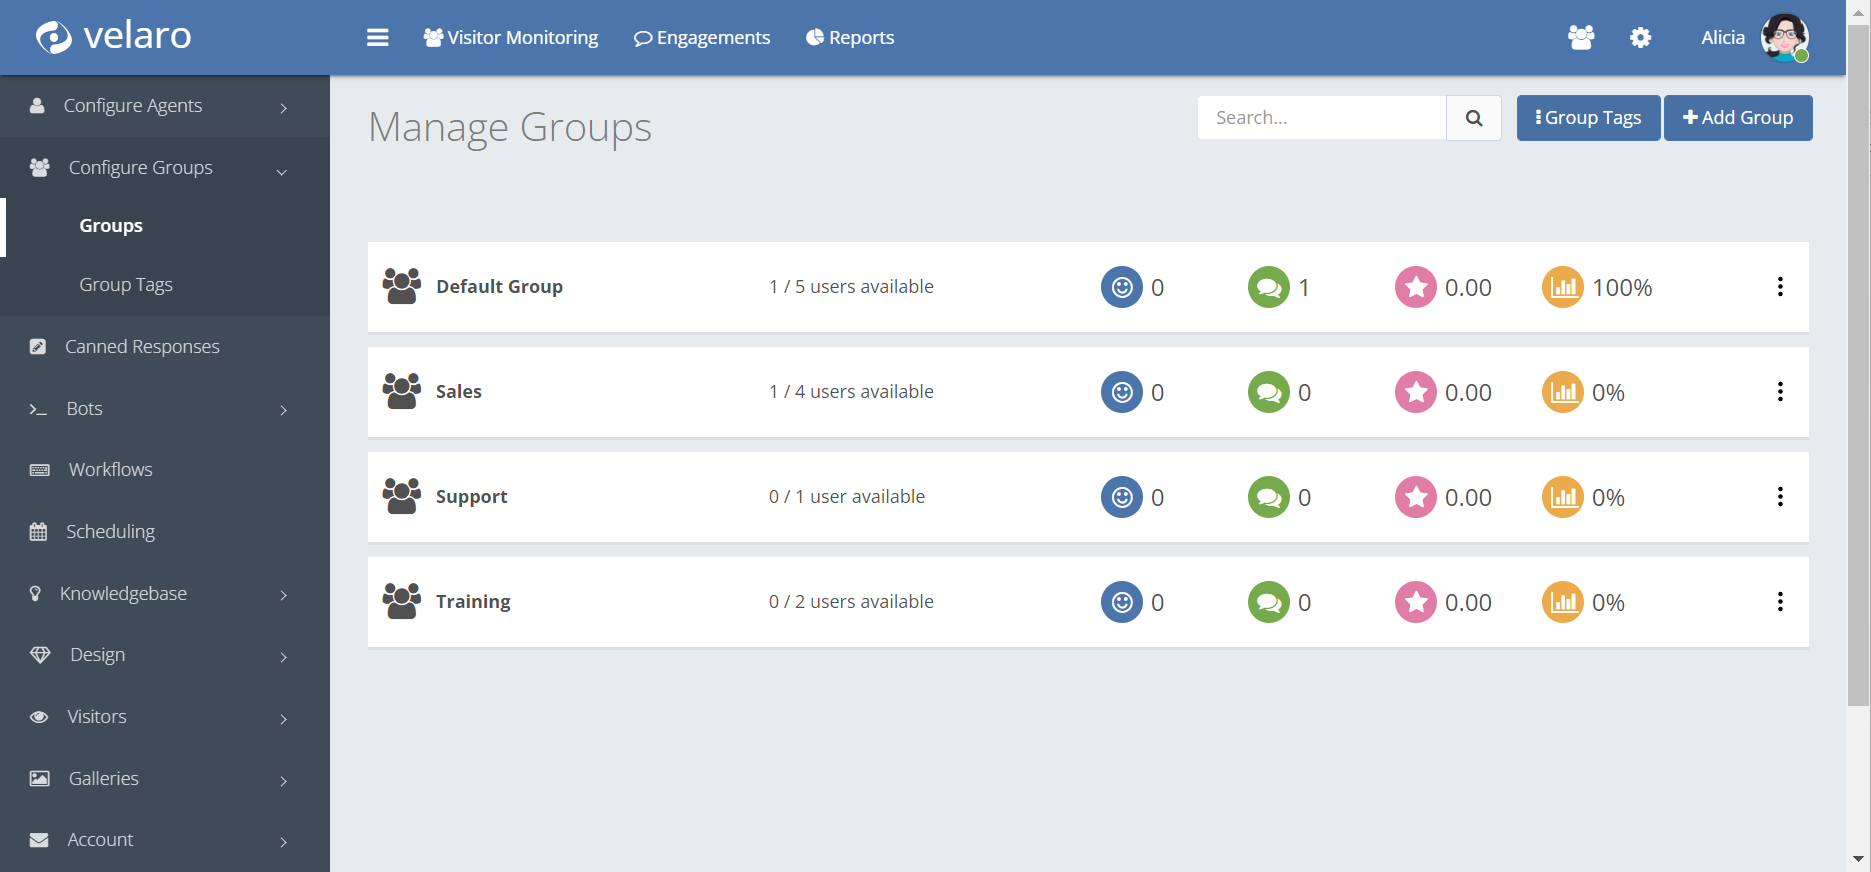 Manage groups screen